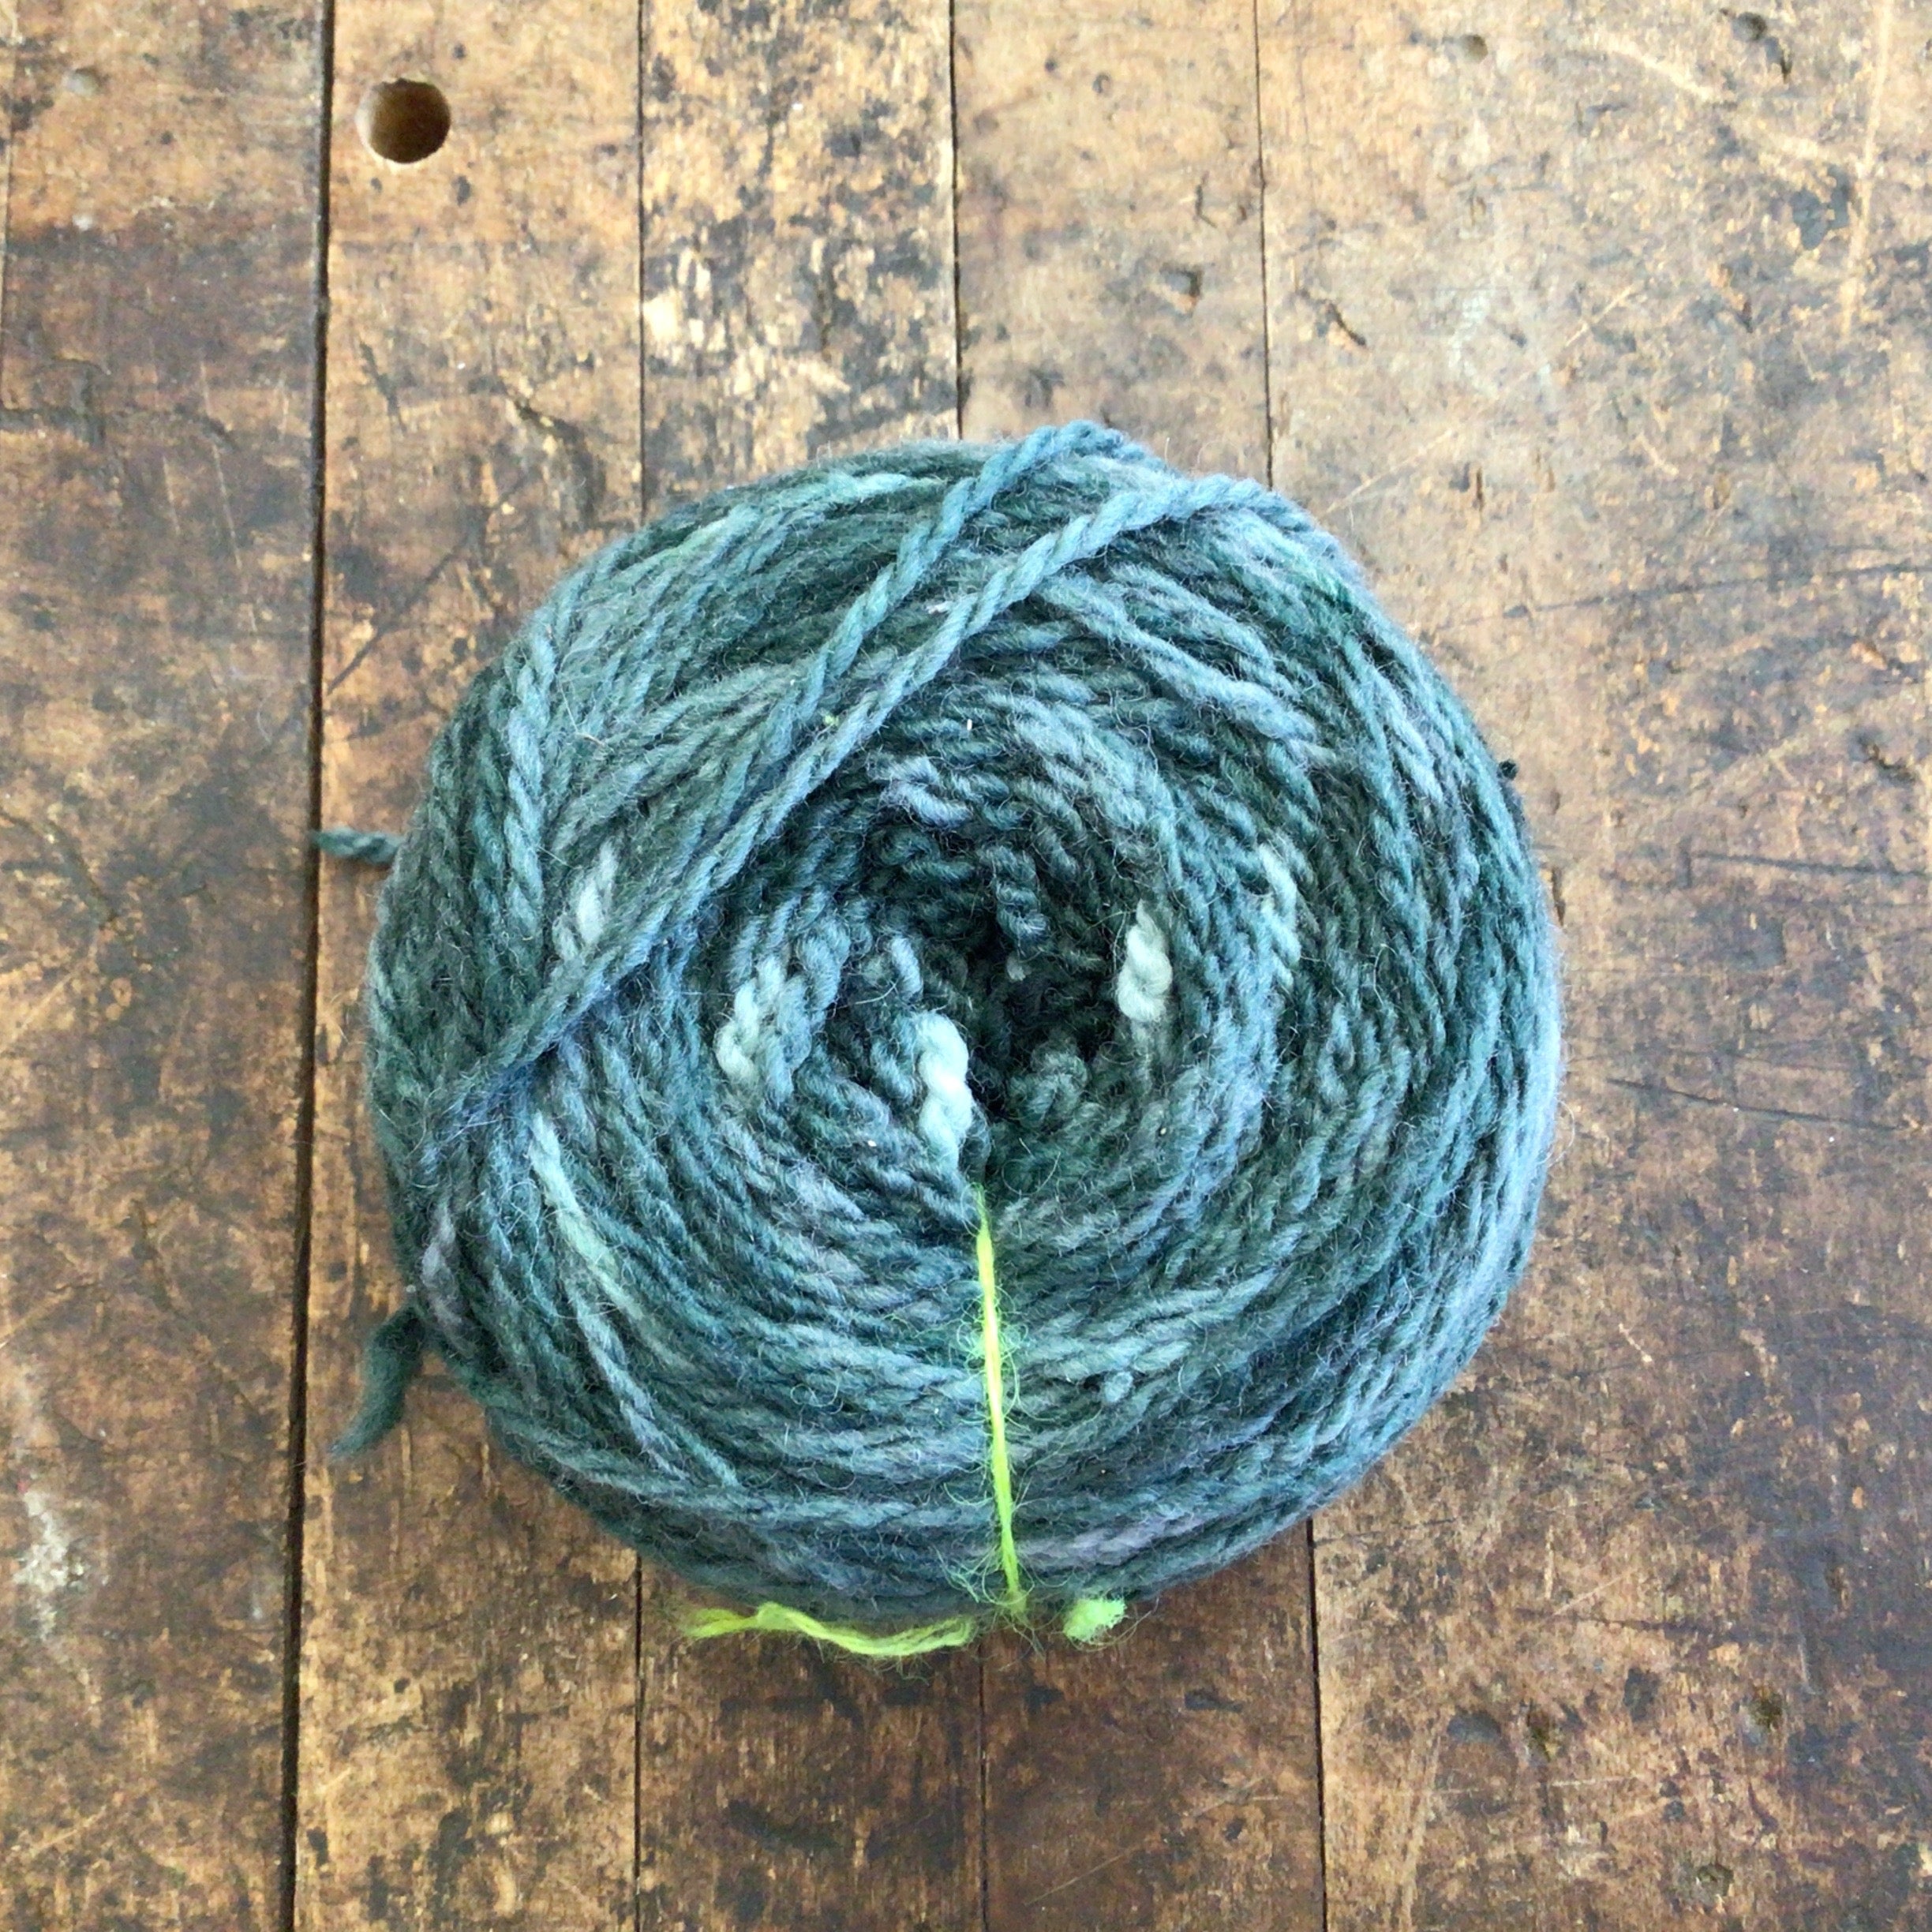 Tronstad Ranch Rambouillet 2 Ply Worsted Weight Yarn - Balsam